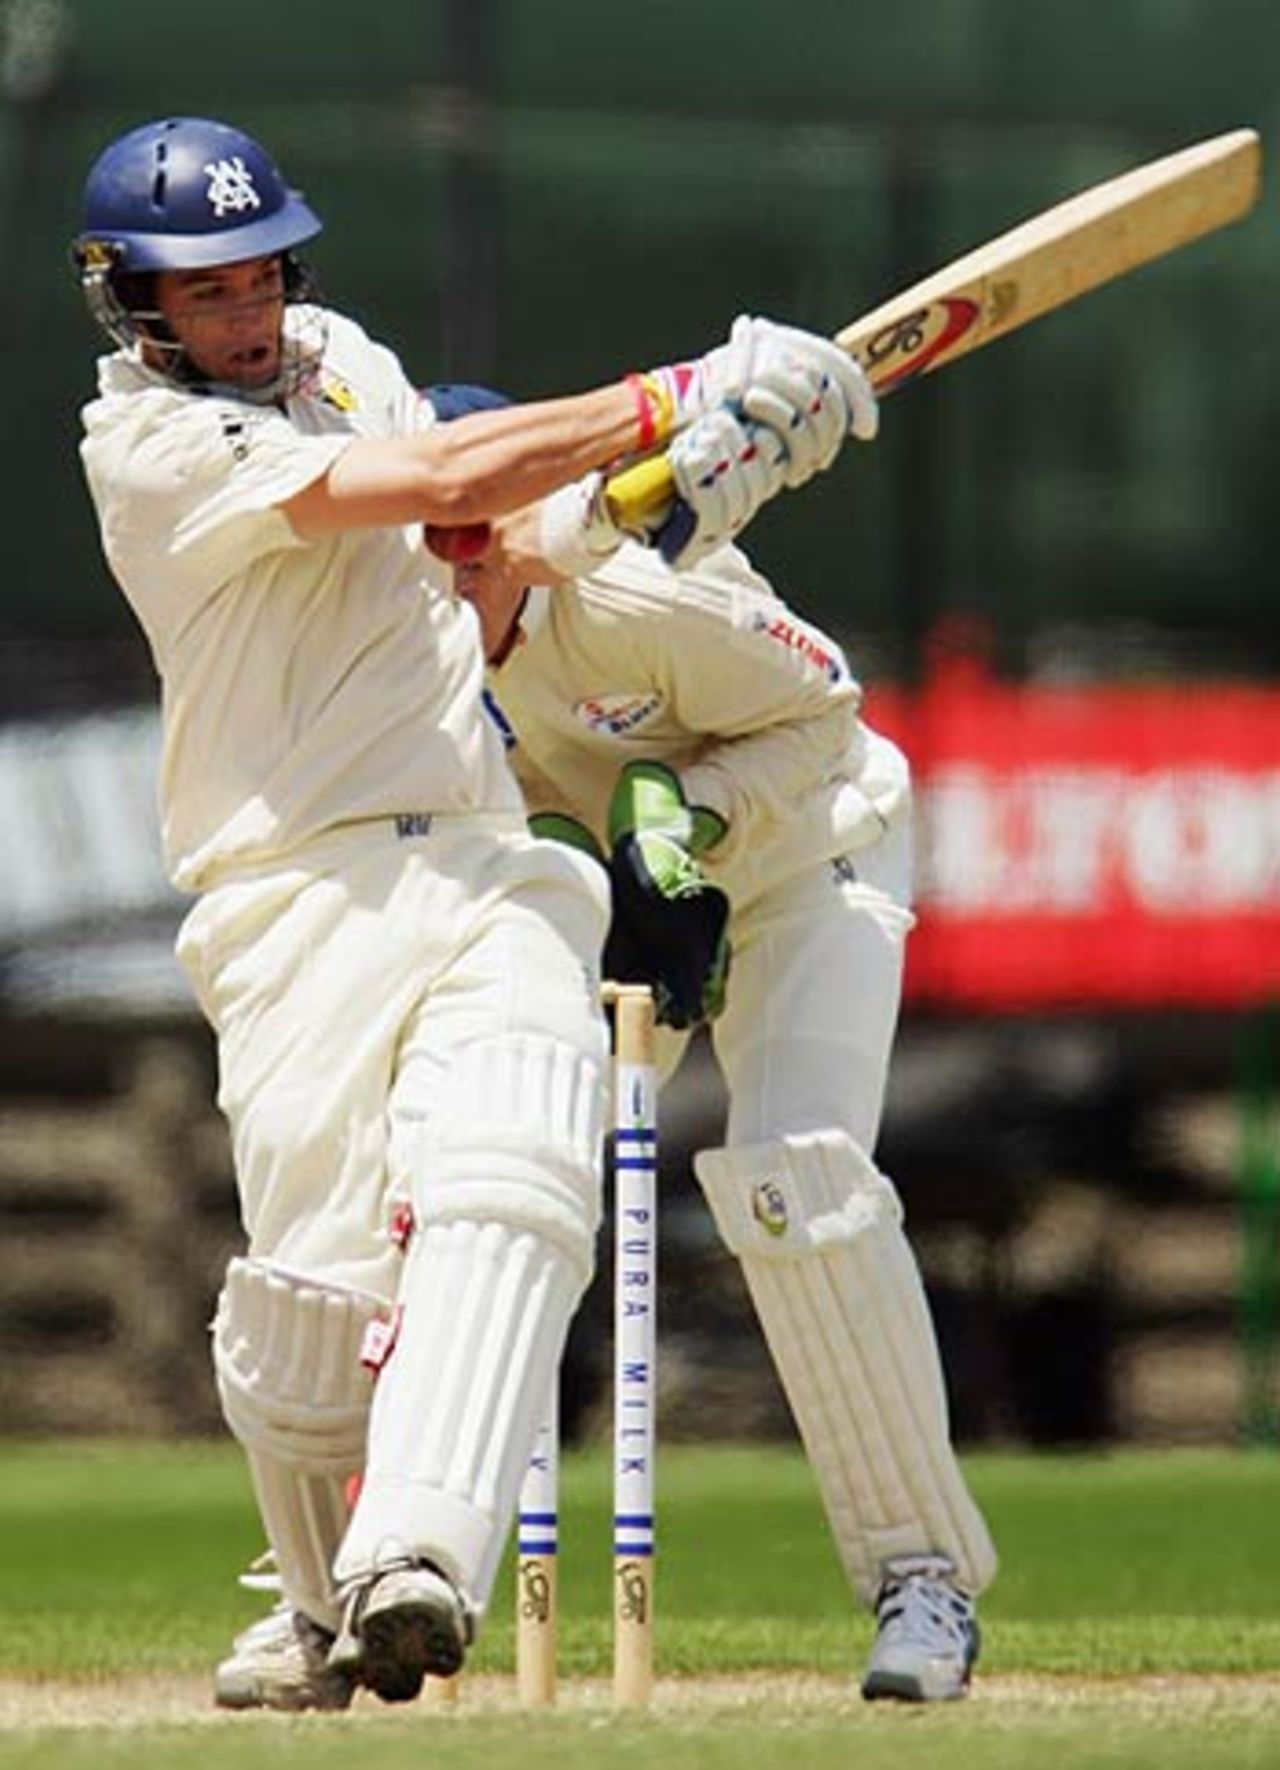 Adam Crosthwaite pulls during his innings of 40 against NSW on day four, Victoria v New South Wales, Melbourne, December 9, 2005